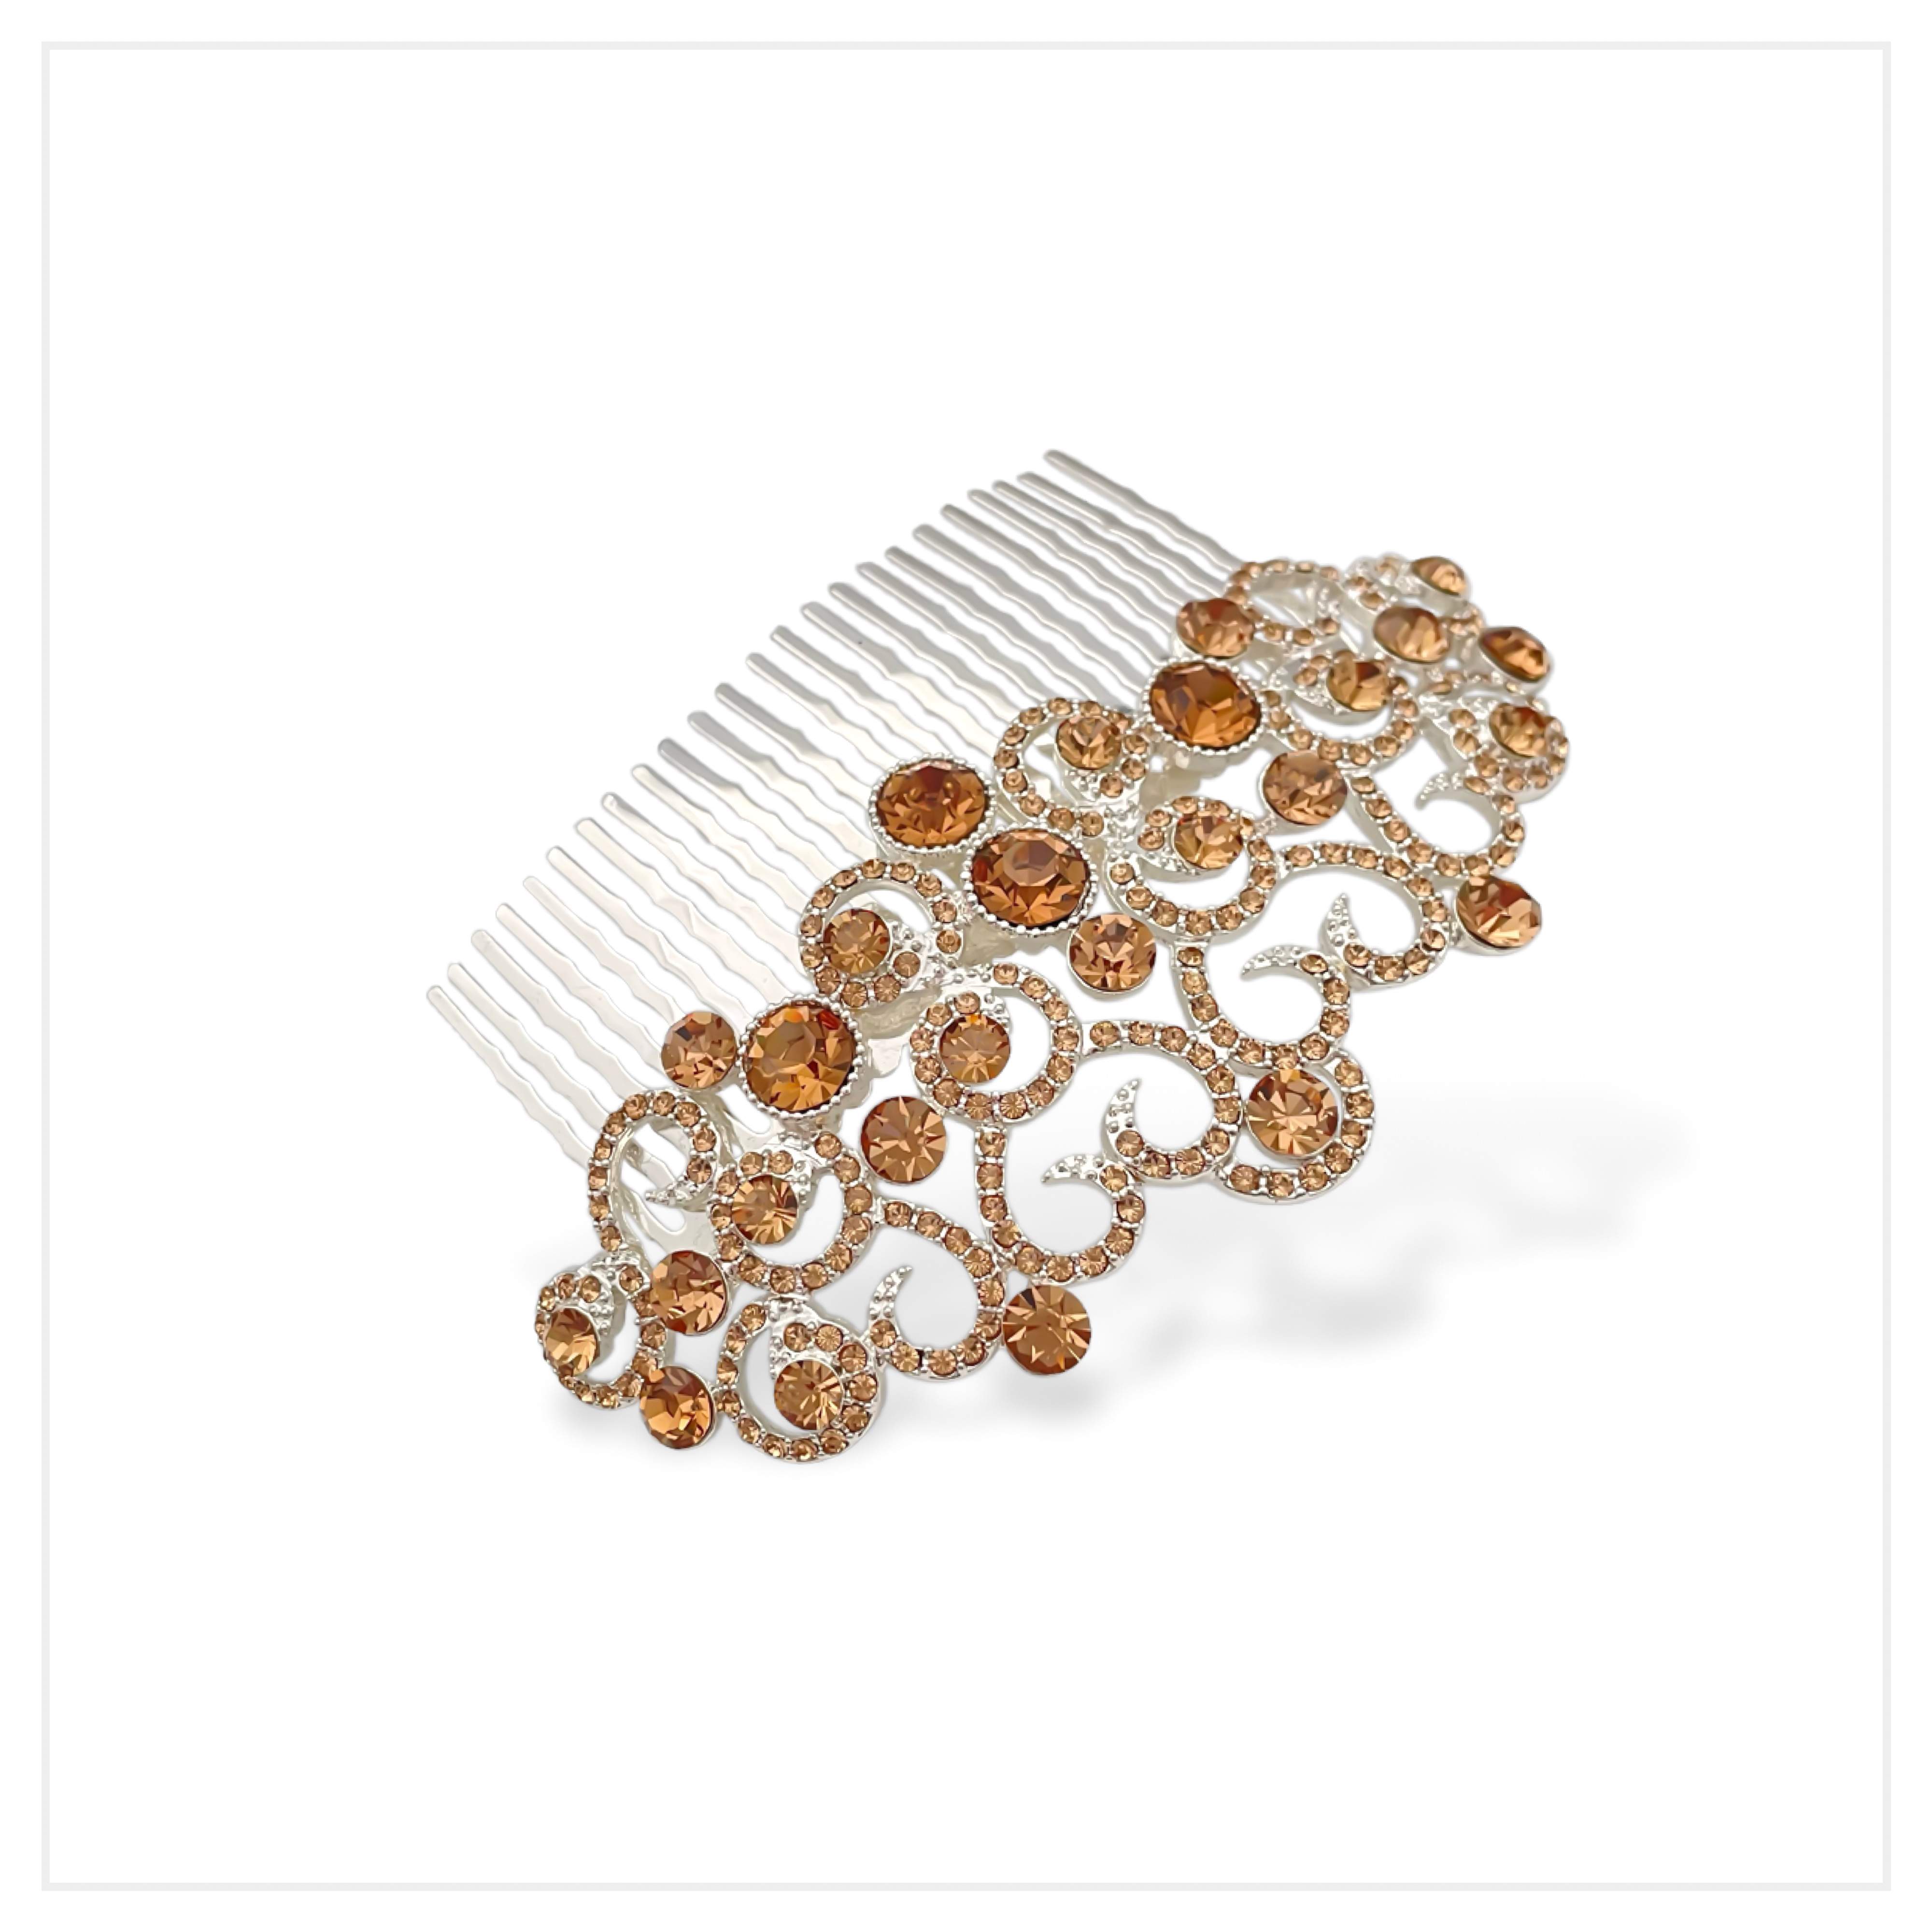 Hair Comb - LEILAH1/LCTS